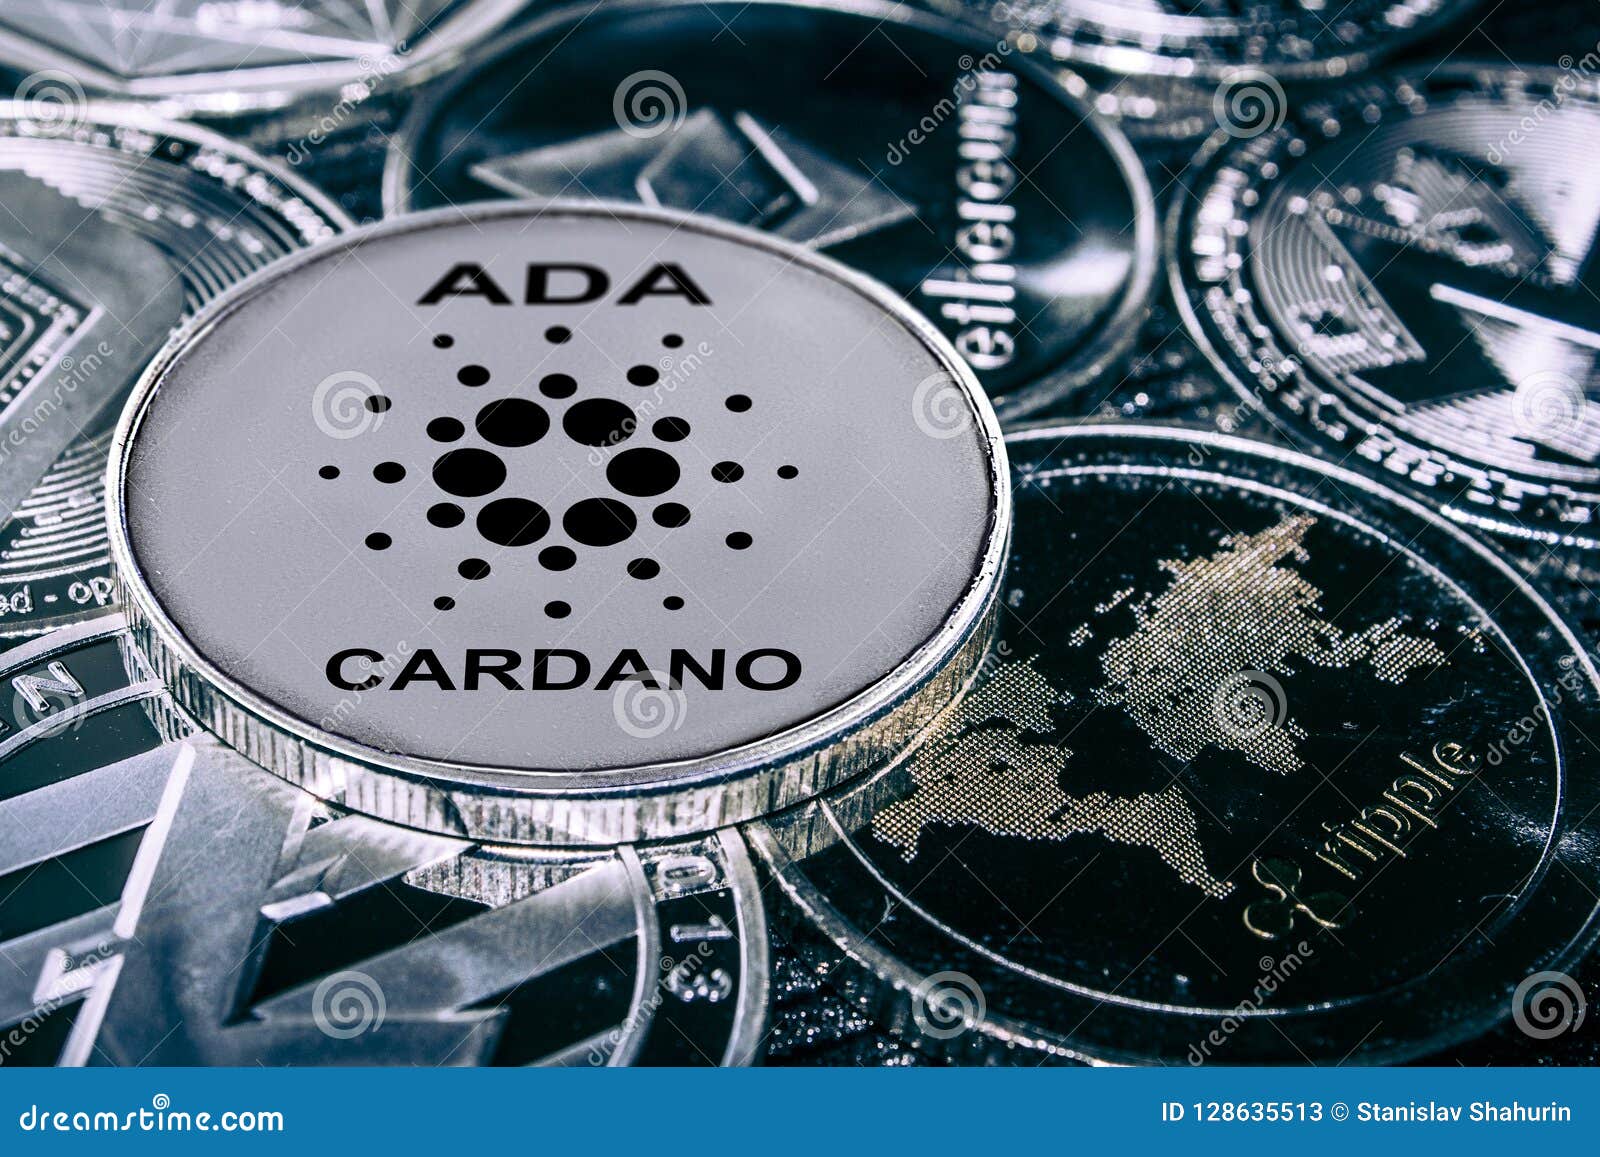 what is ada crypto used for